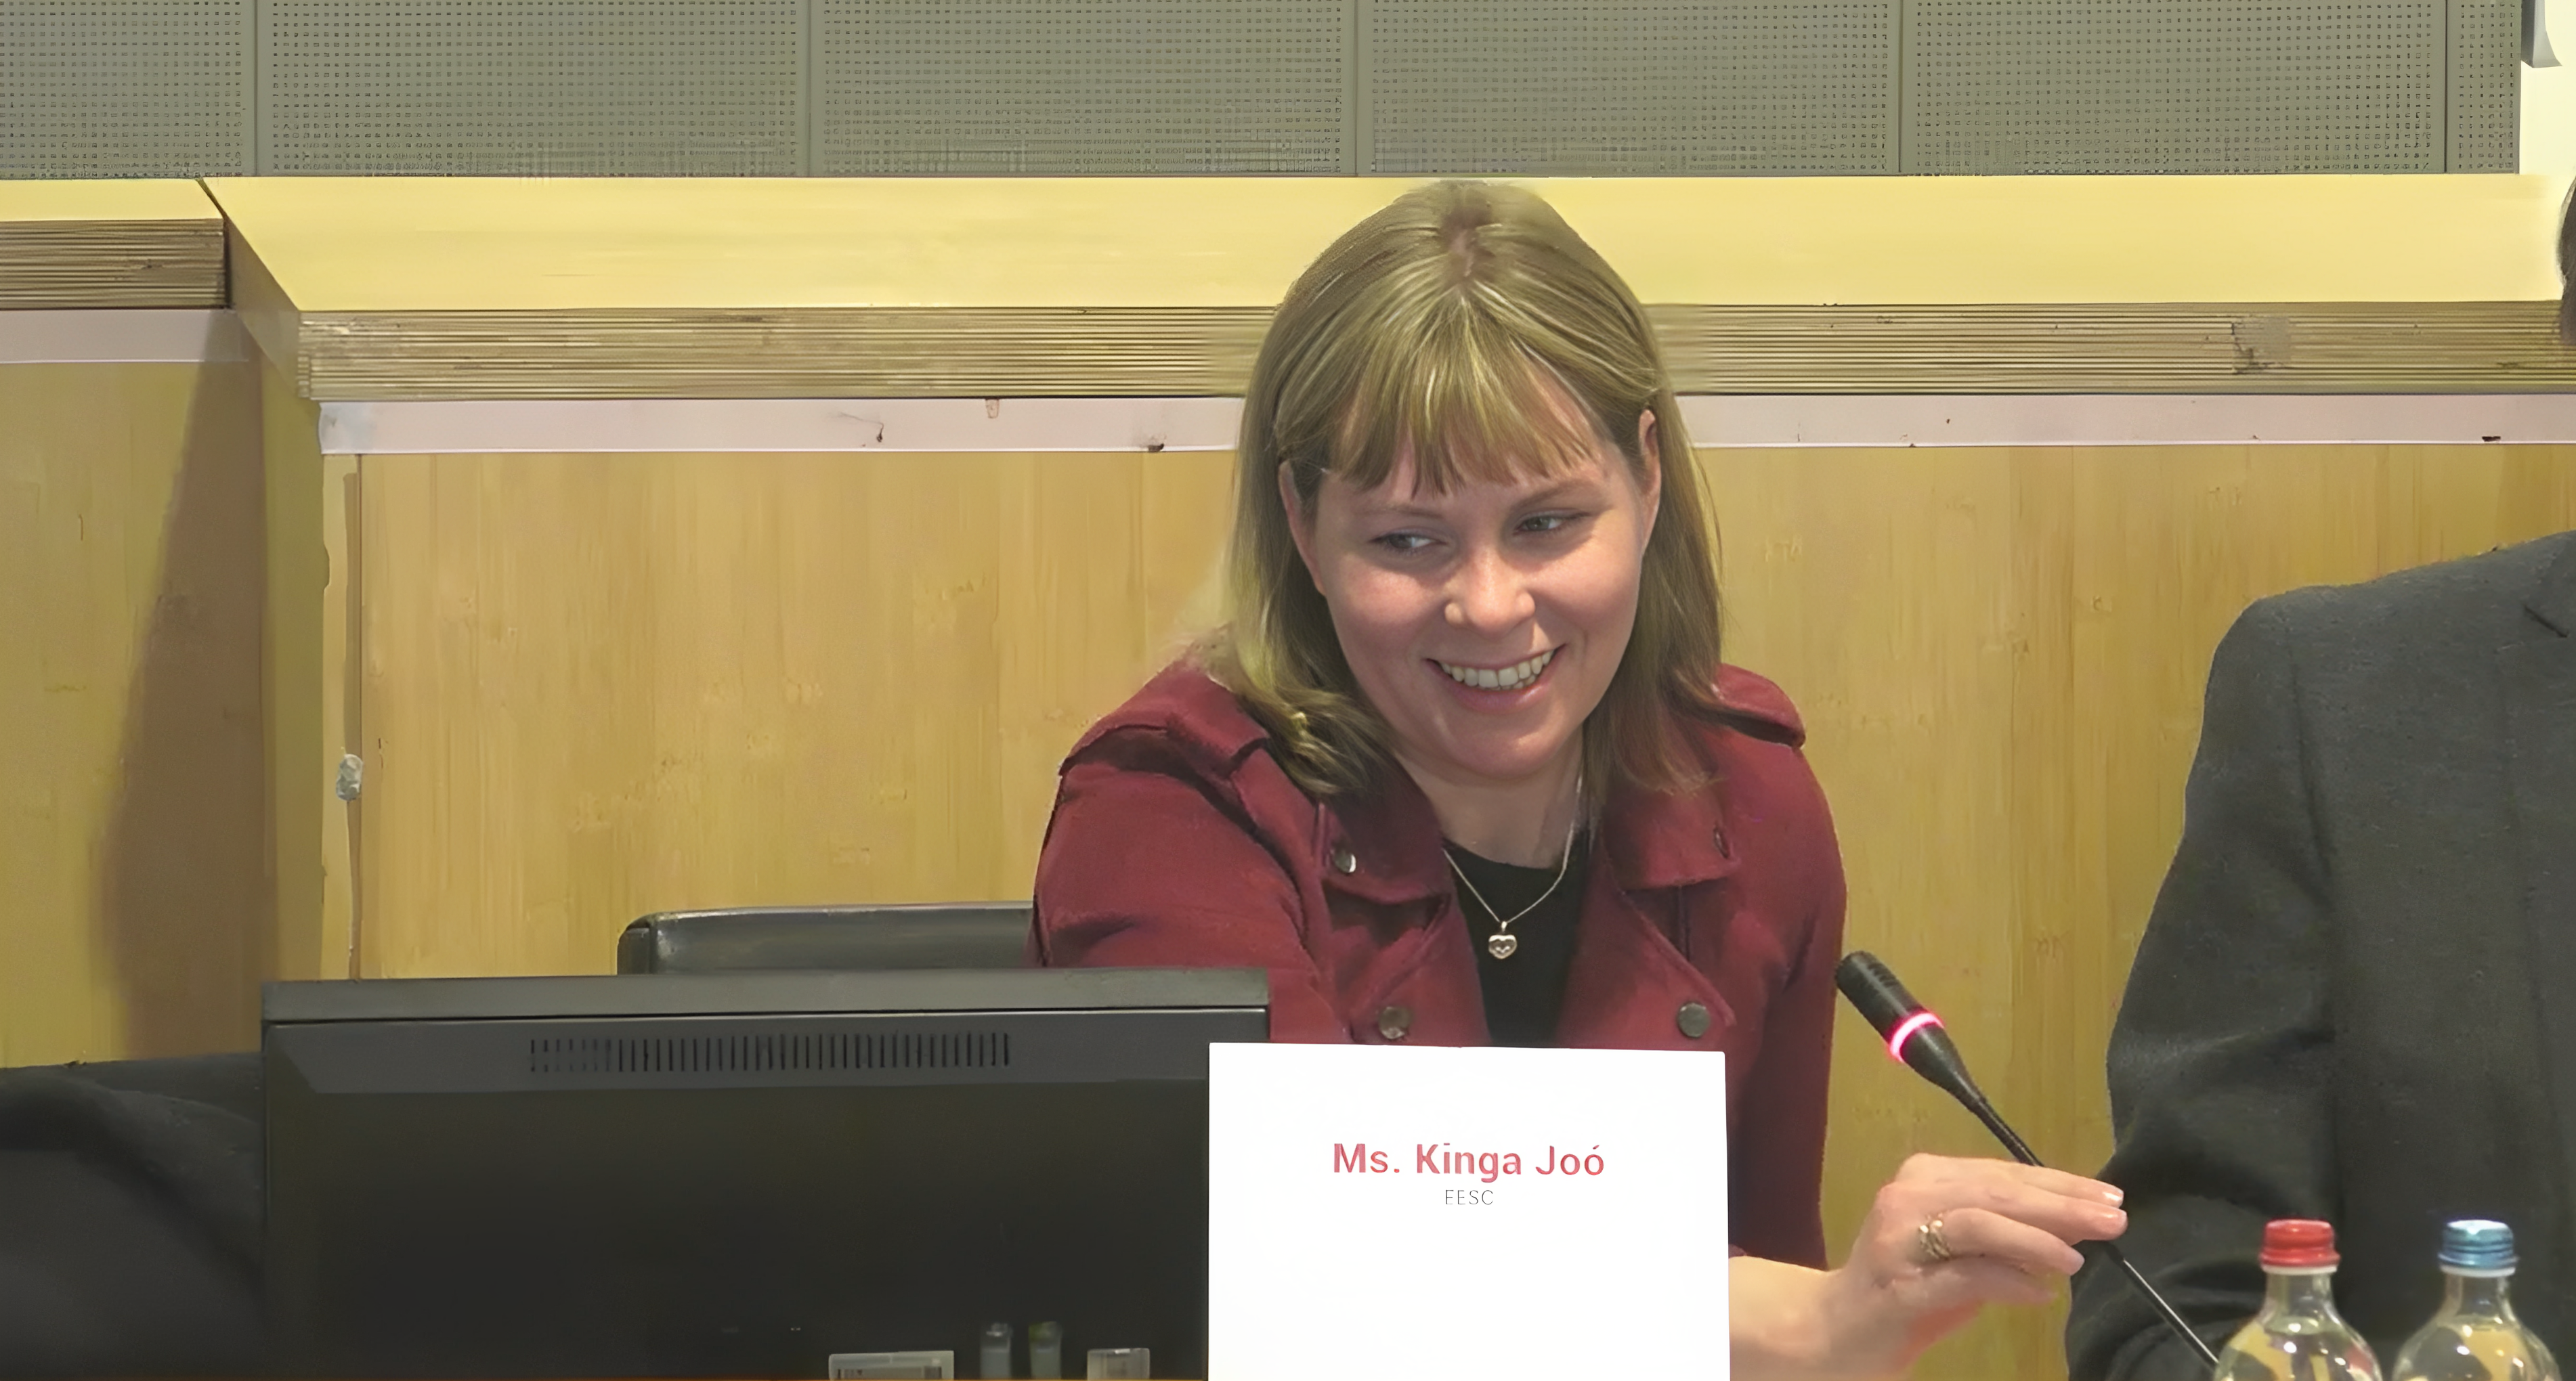 Ms. Kinga Joó wearing a smile as she sits at the speaker's table, confidently holding the microphone.